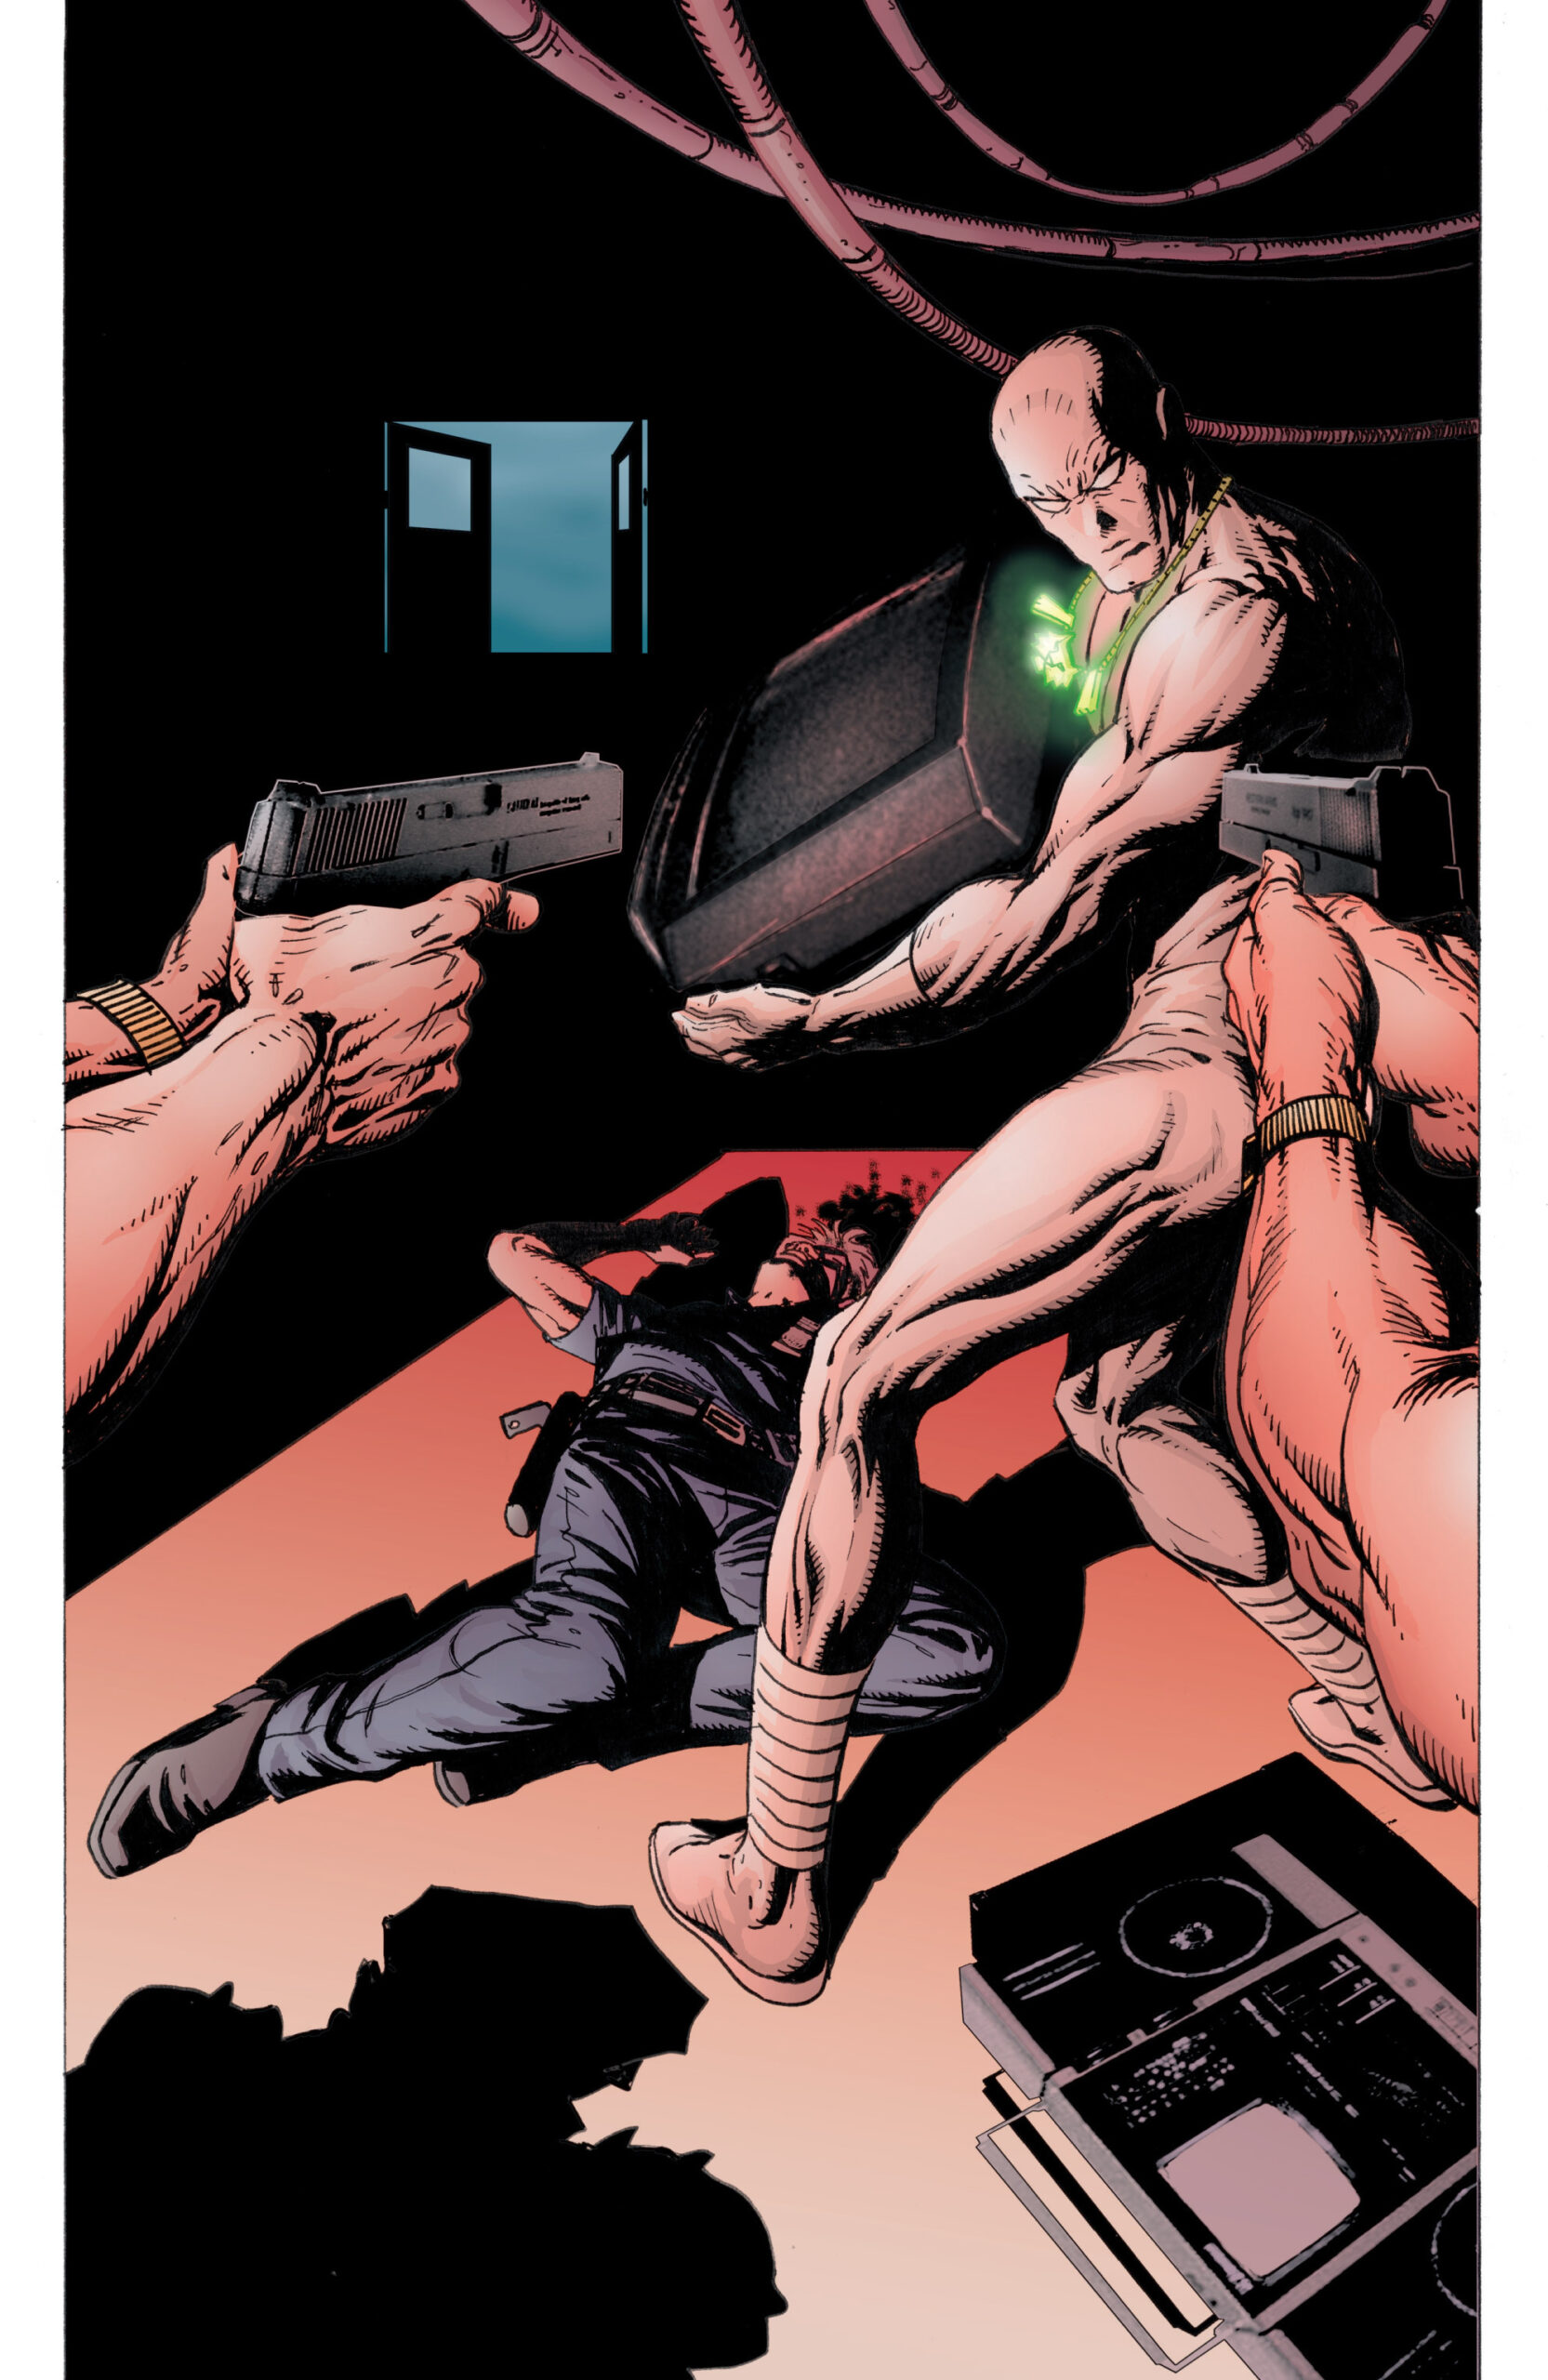 Hector Ayala finds himself in an incriminating position in Daredevil Vol. 2 #38 "The Trial of the Century, Part 1" (2002), Marvel Comics. Words by Brian Michael Bendis, art by Manuel Gutierrez, Matt Hollingsworth, and Richard Starkings.